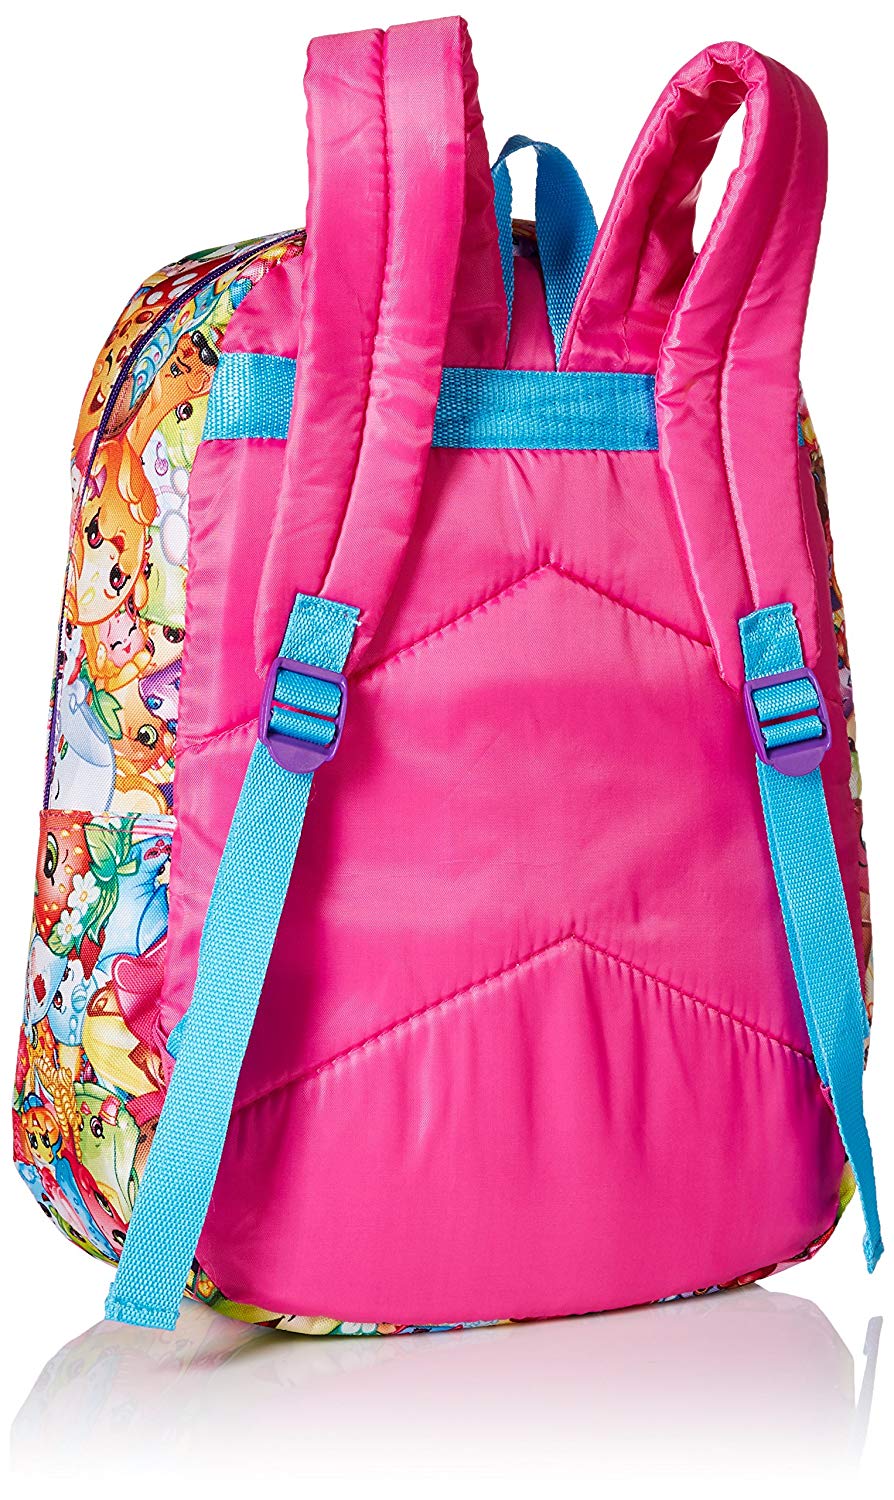 Shopkins Little Girls Print Backpack, Multi, One Size SY30713 - image 3 of 3